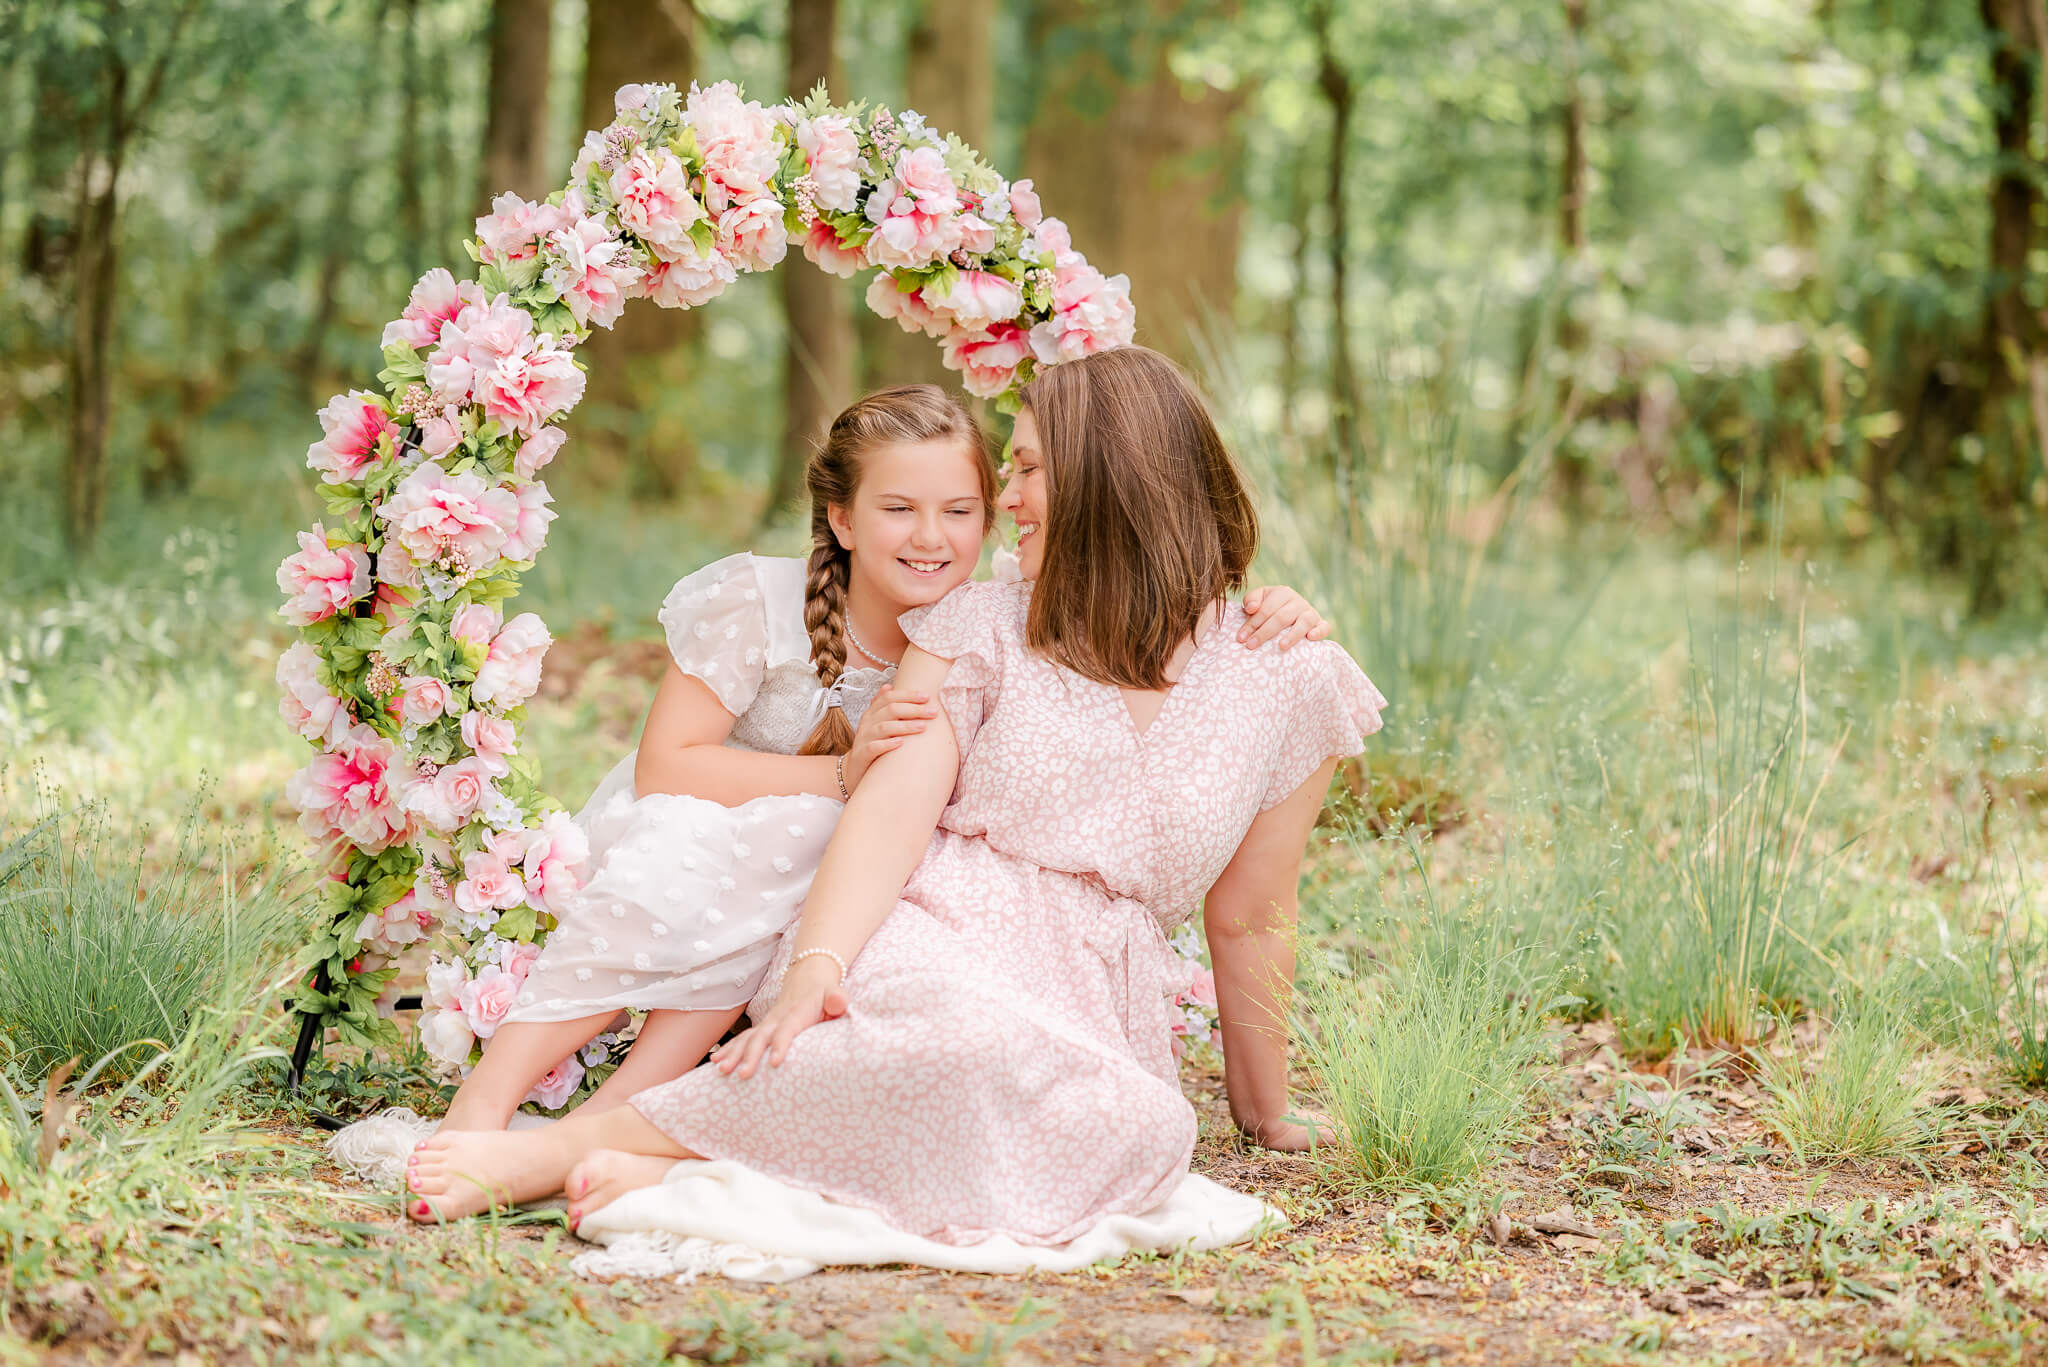 A mother and daughter, dressed in white and light pink, snuggle. There is a hoop decorated with pink flowers behind them. The girl enjoys trampoline parks in Virginia Beach.